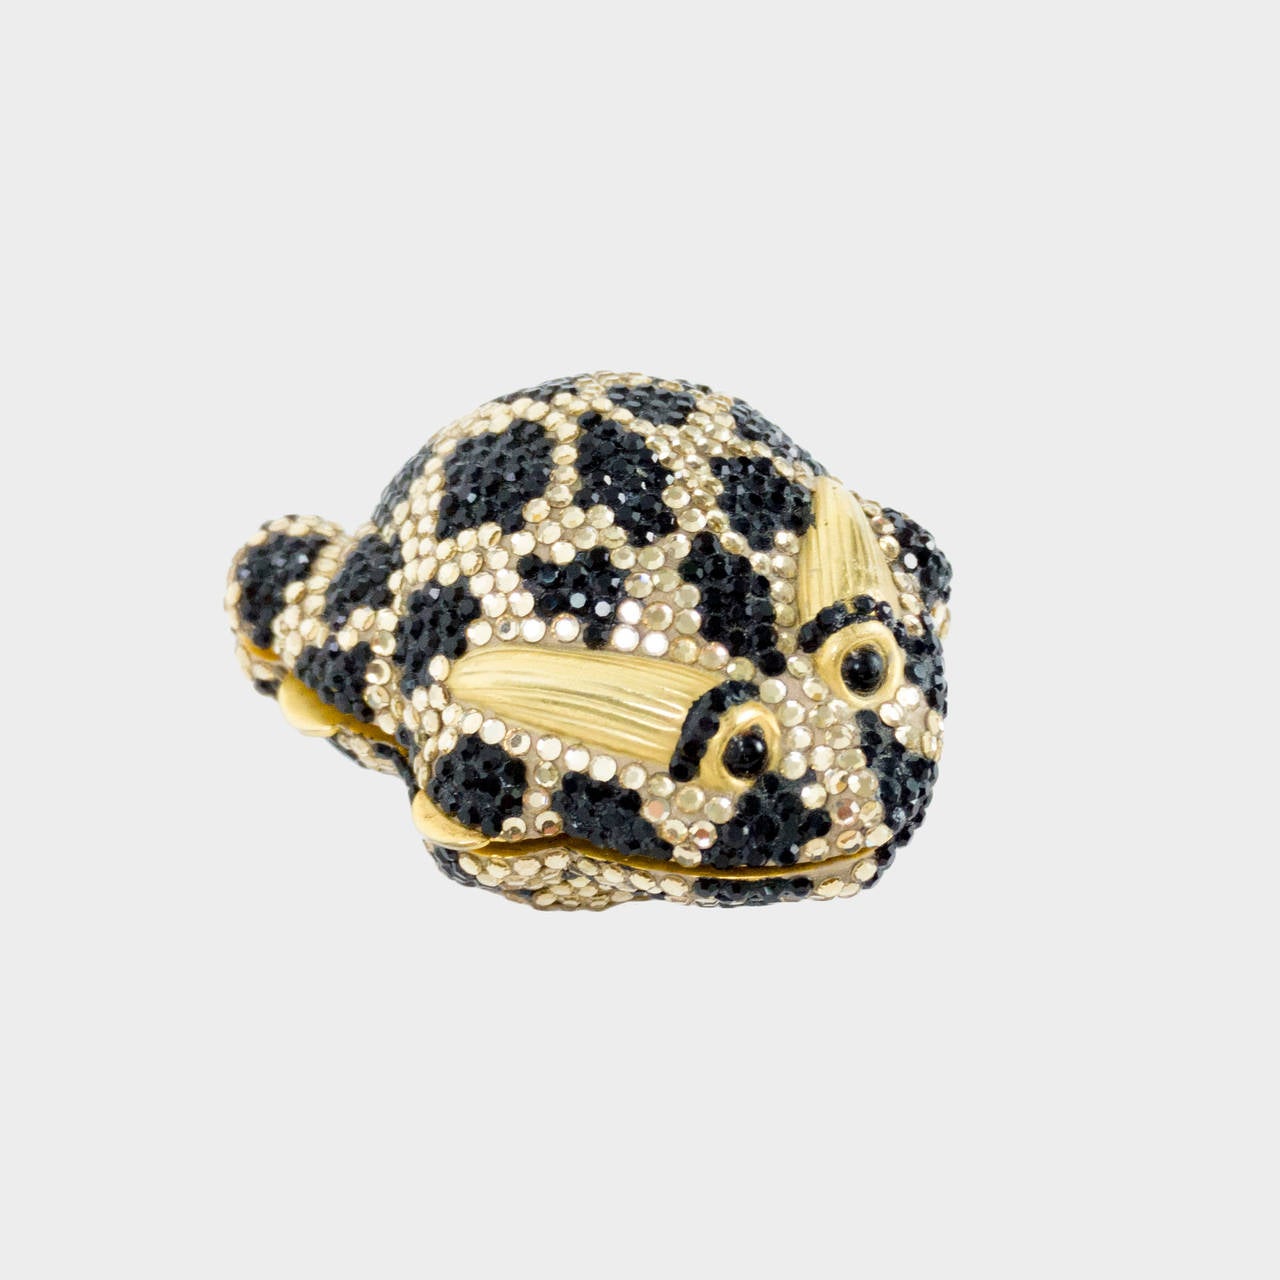 Featuring an Adorable Frog encrusted with clear and black Swarovski Crystals. Signed and dated: Judith Leiber 1981. Pillbox measures approx. 2.25” x 1.75”. Perfect for collectors and animal lovers alike!